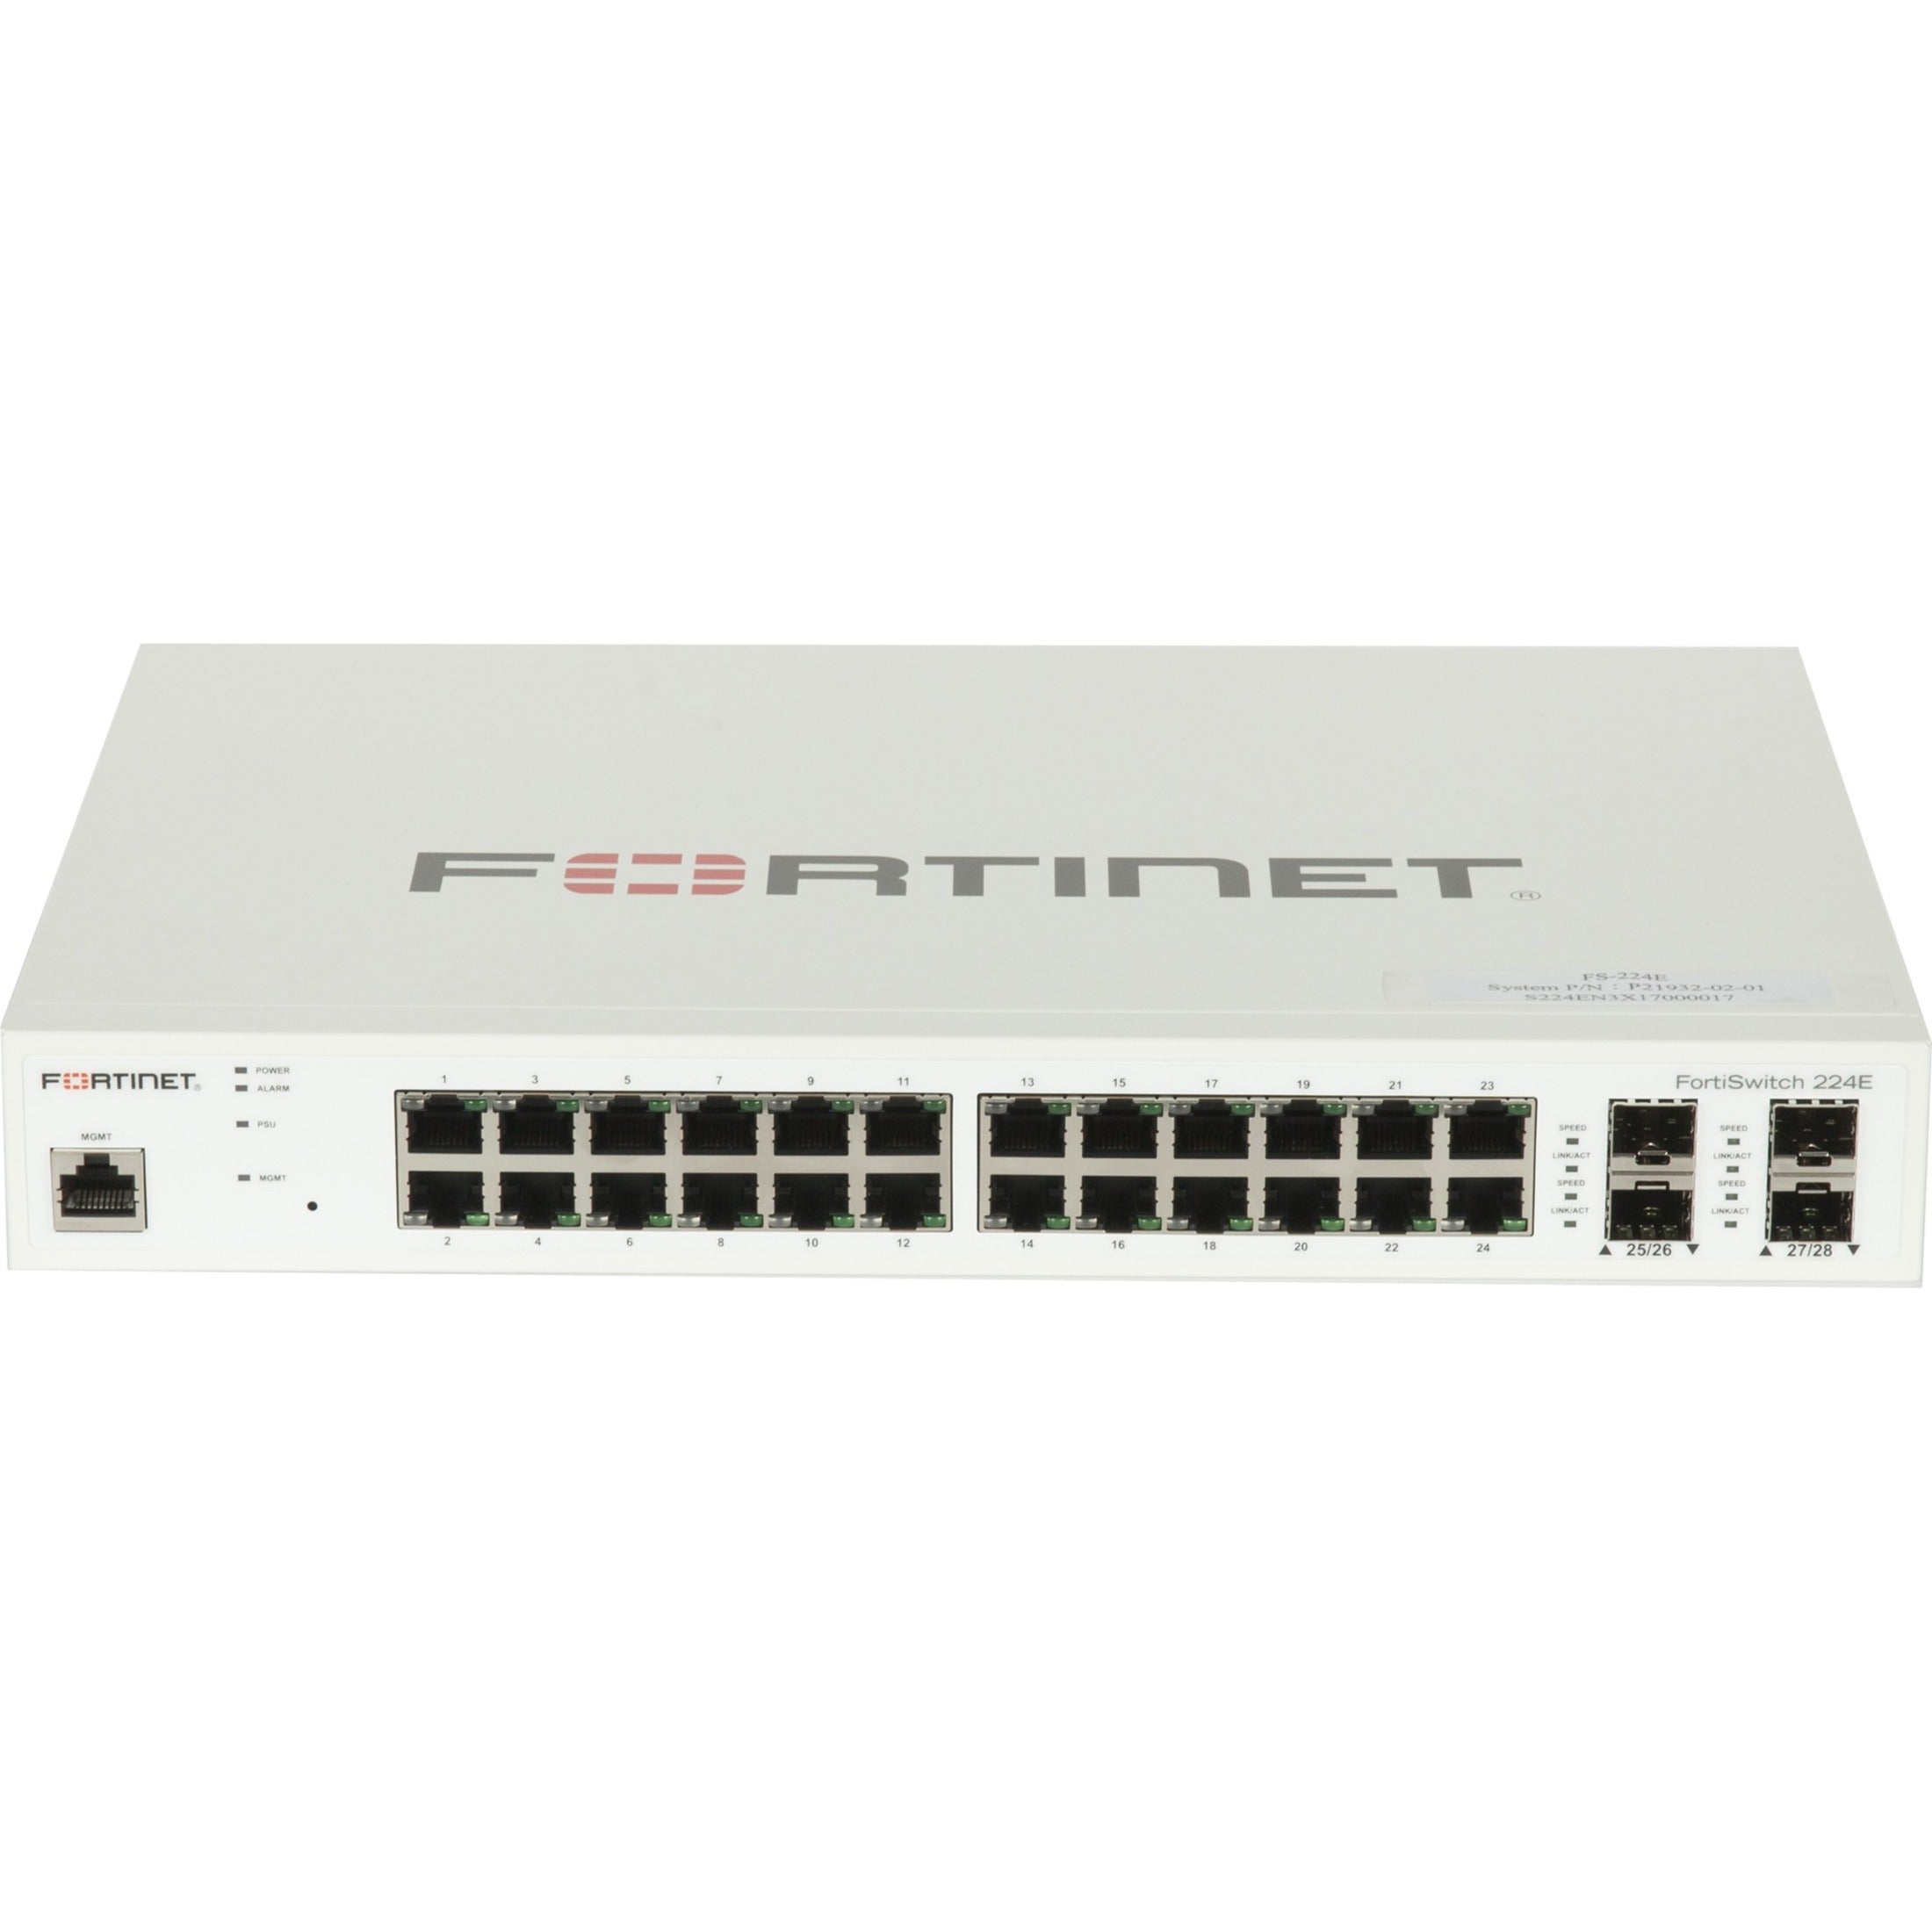 Fortinet FS-224E FortiSwitch Ethernet Switch, Gigabit, 24 Ports, Lifetime Warranty, RoHS 2 Certified